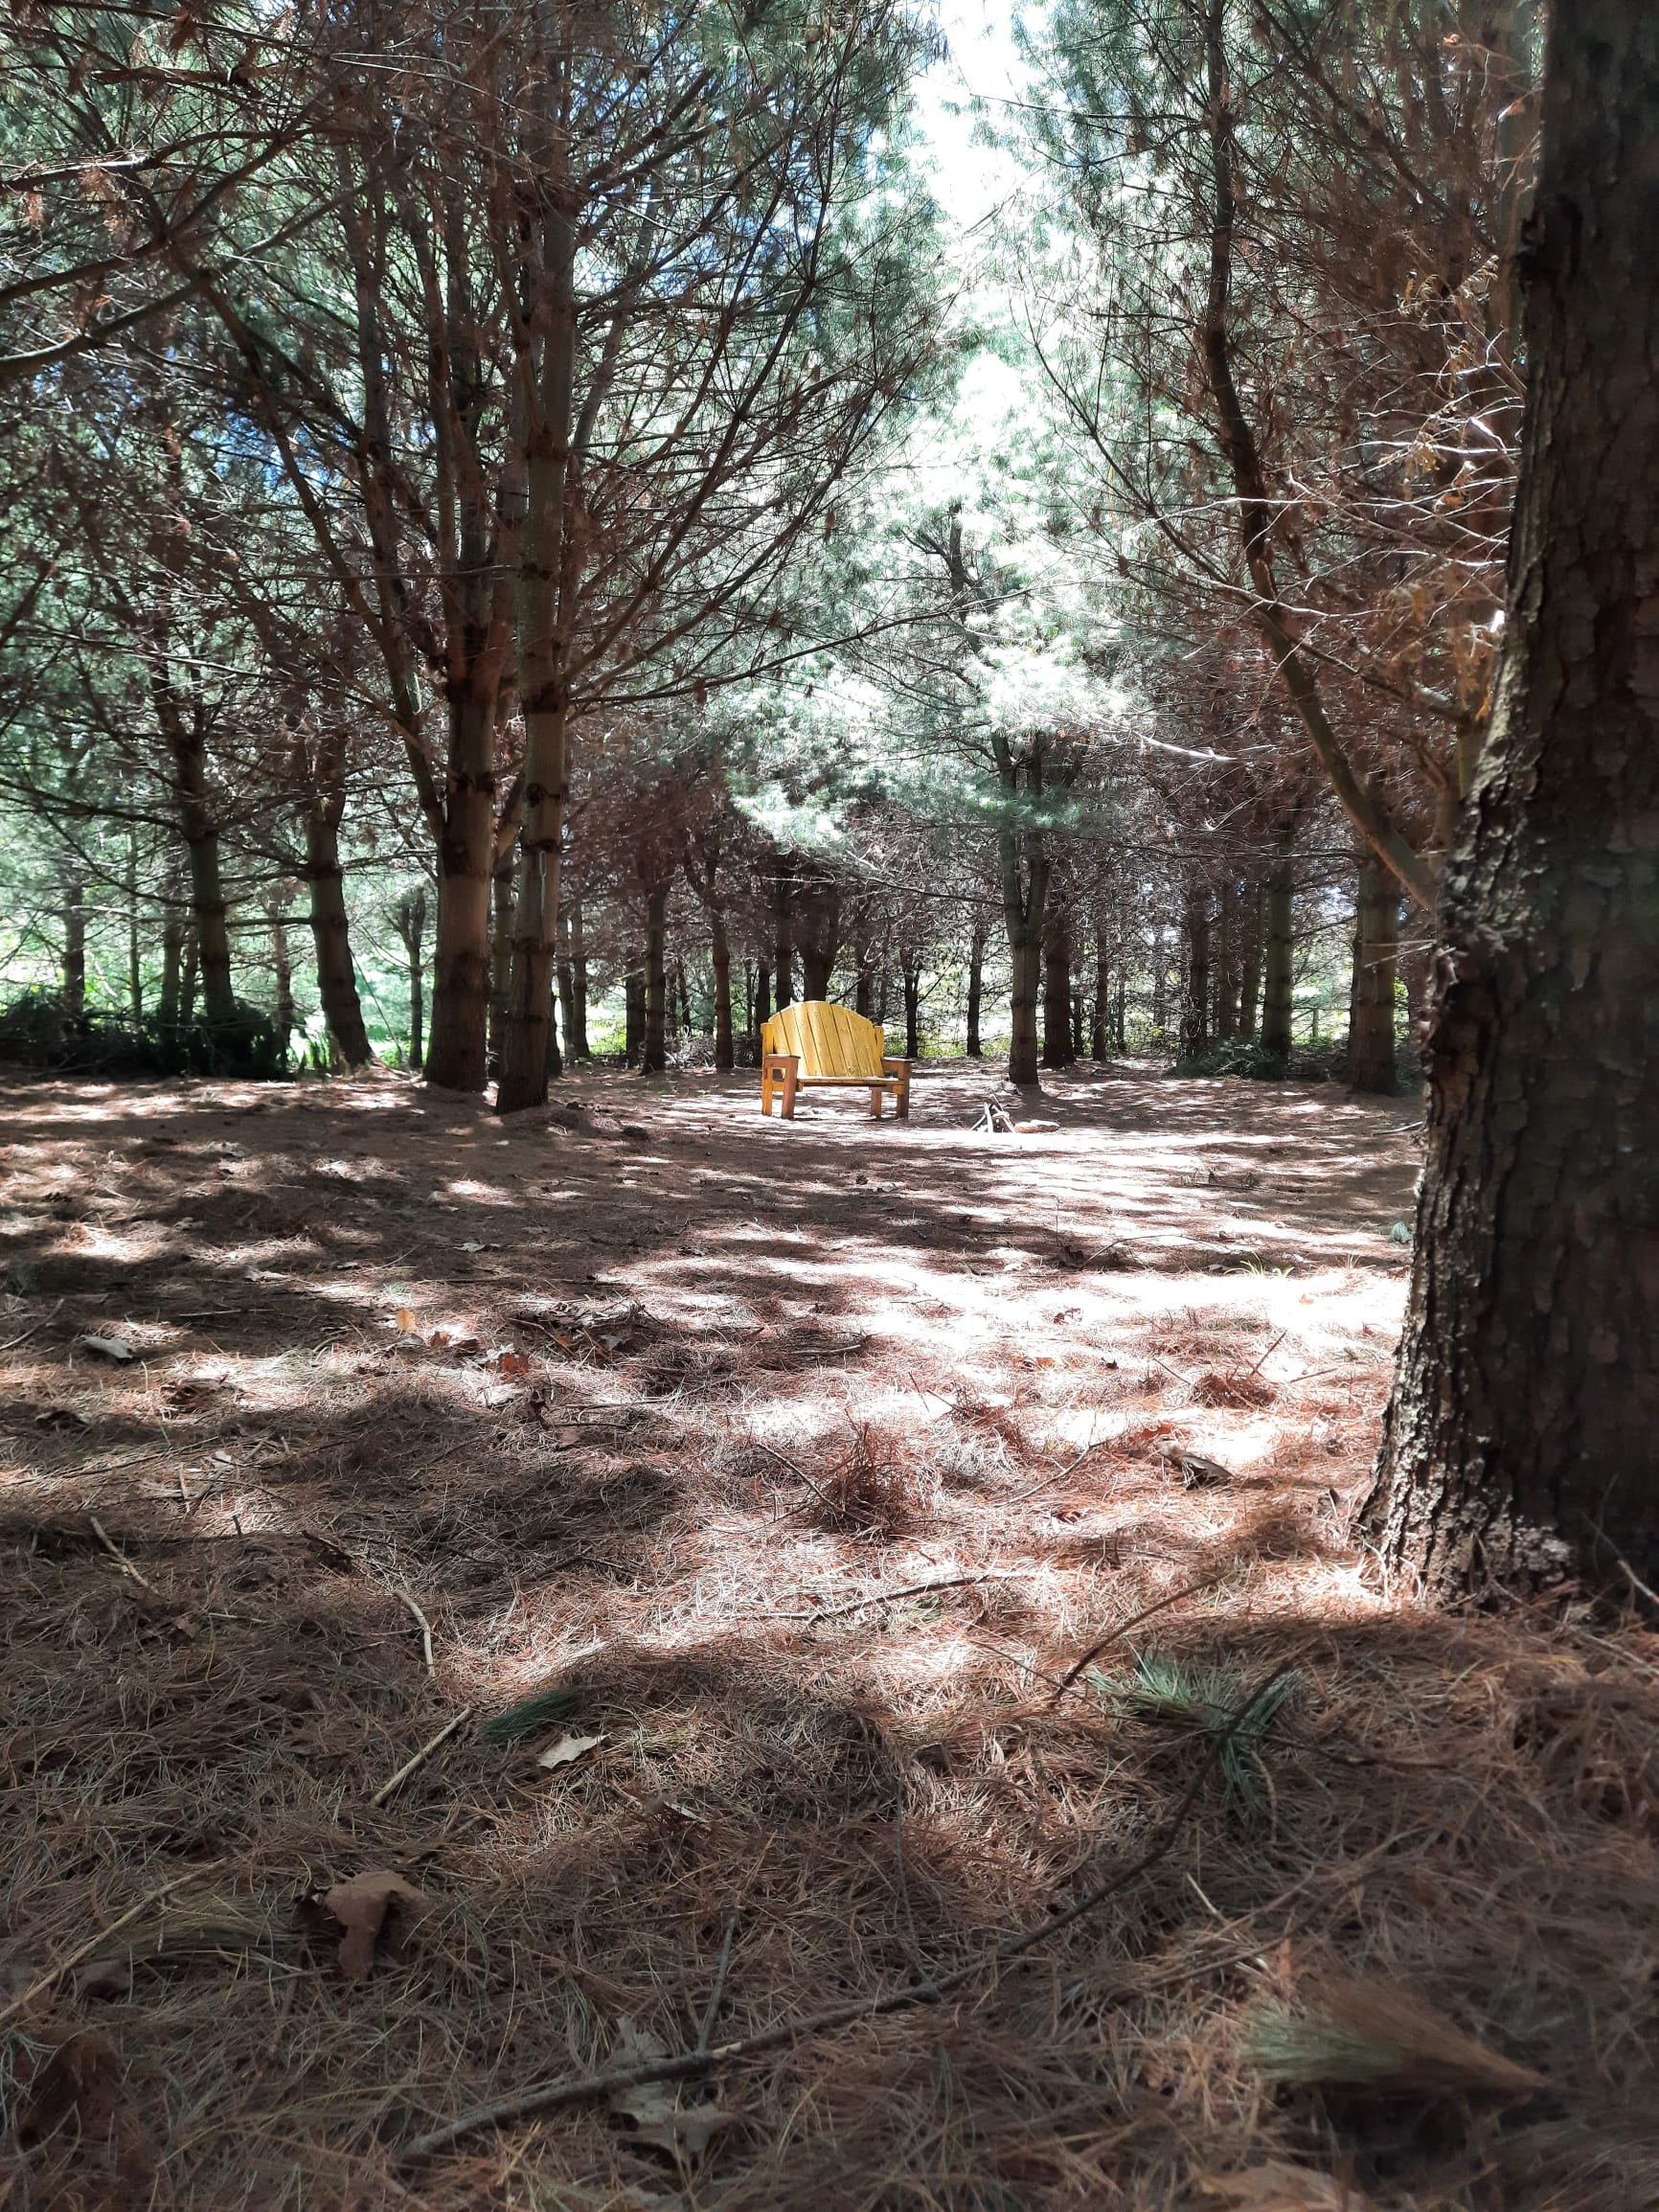 Site 1: Lots of private space under the trees